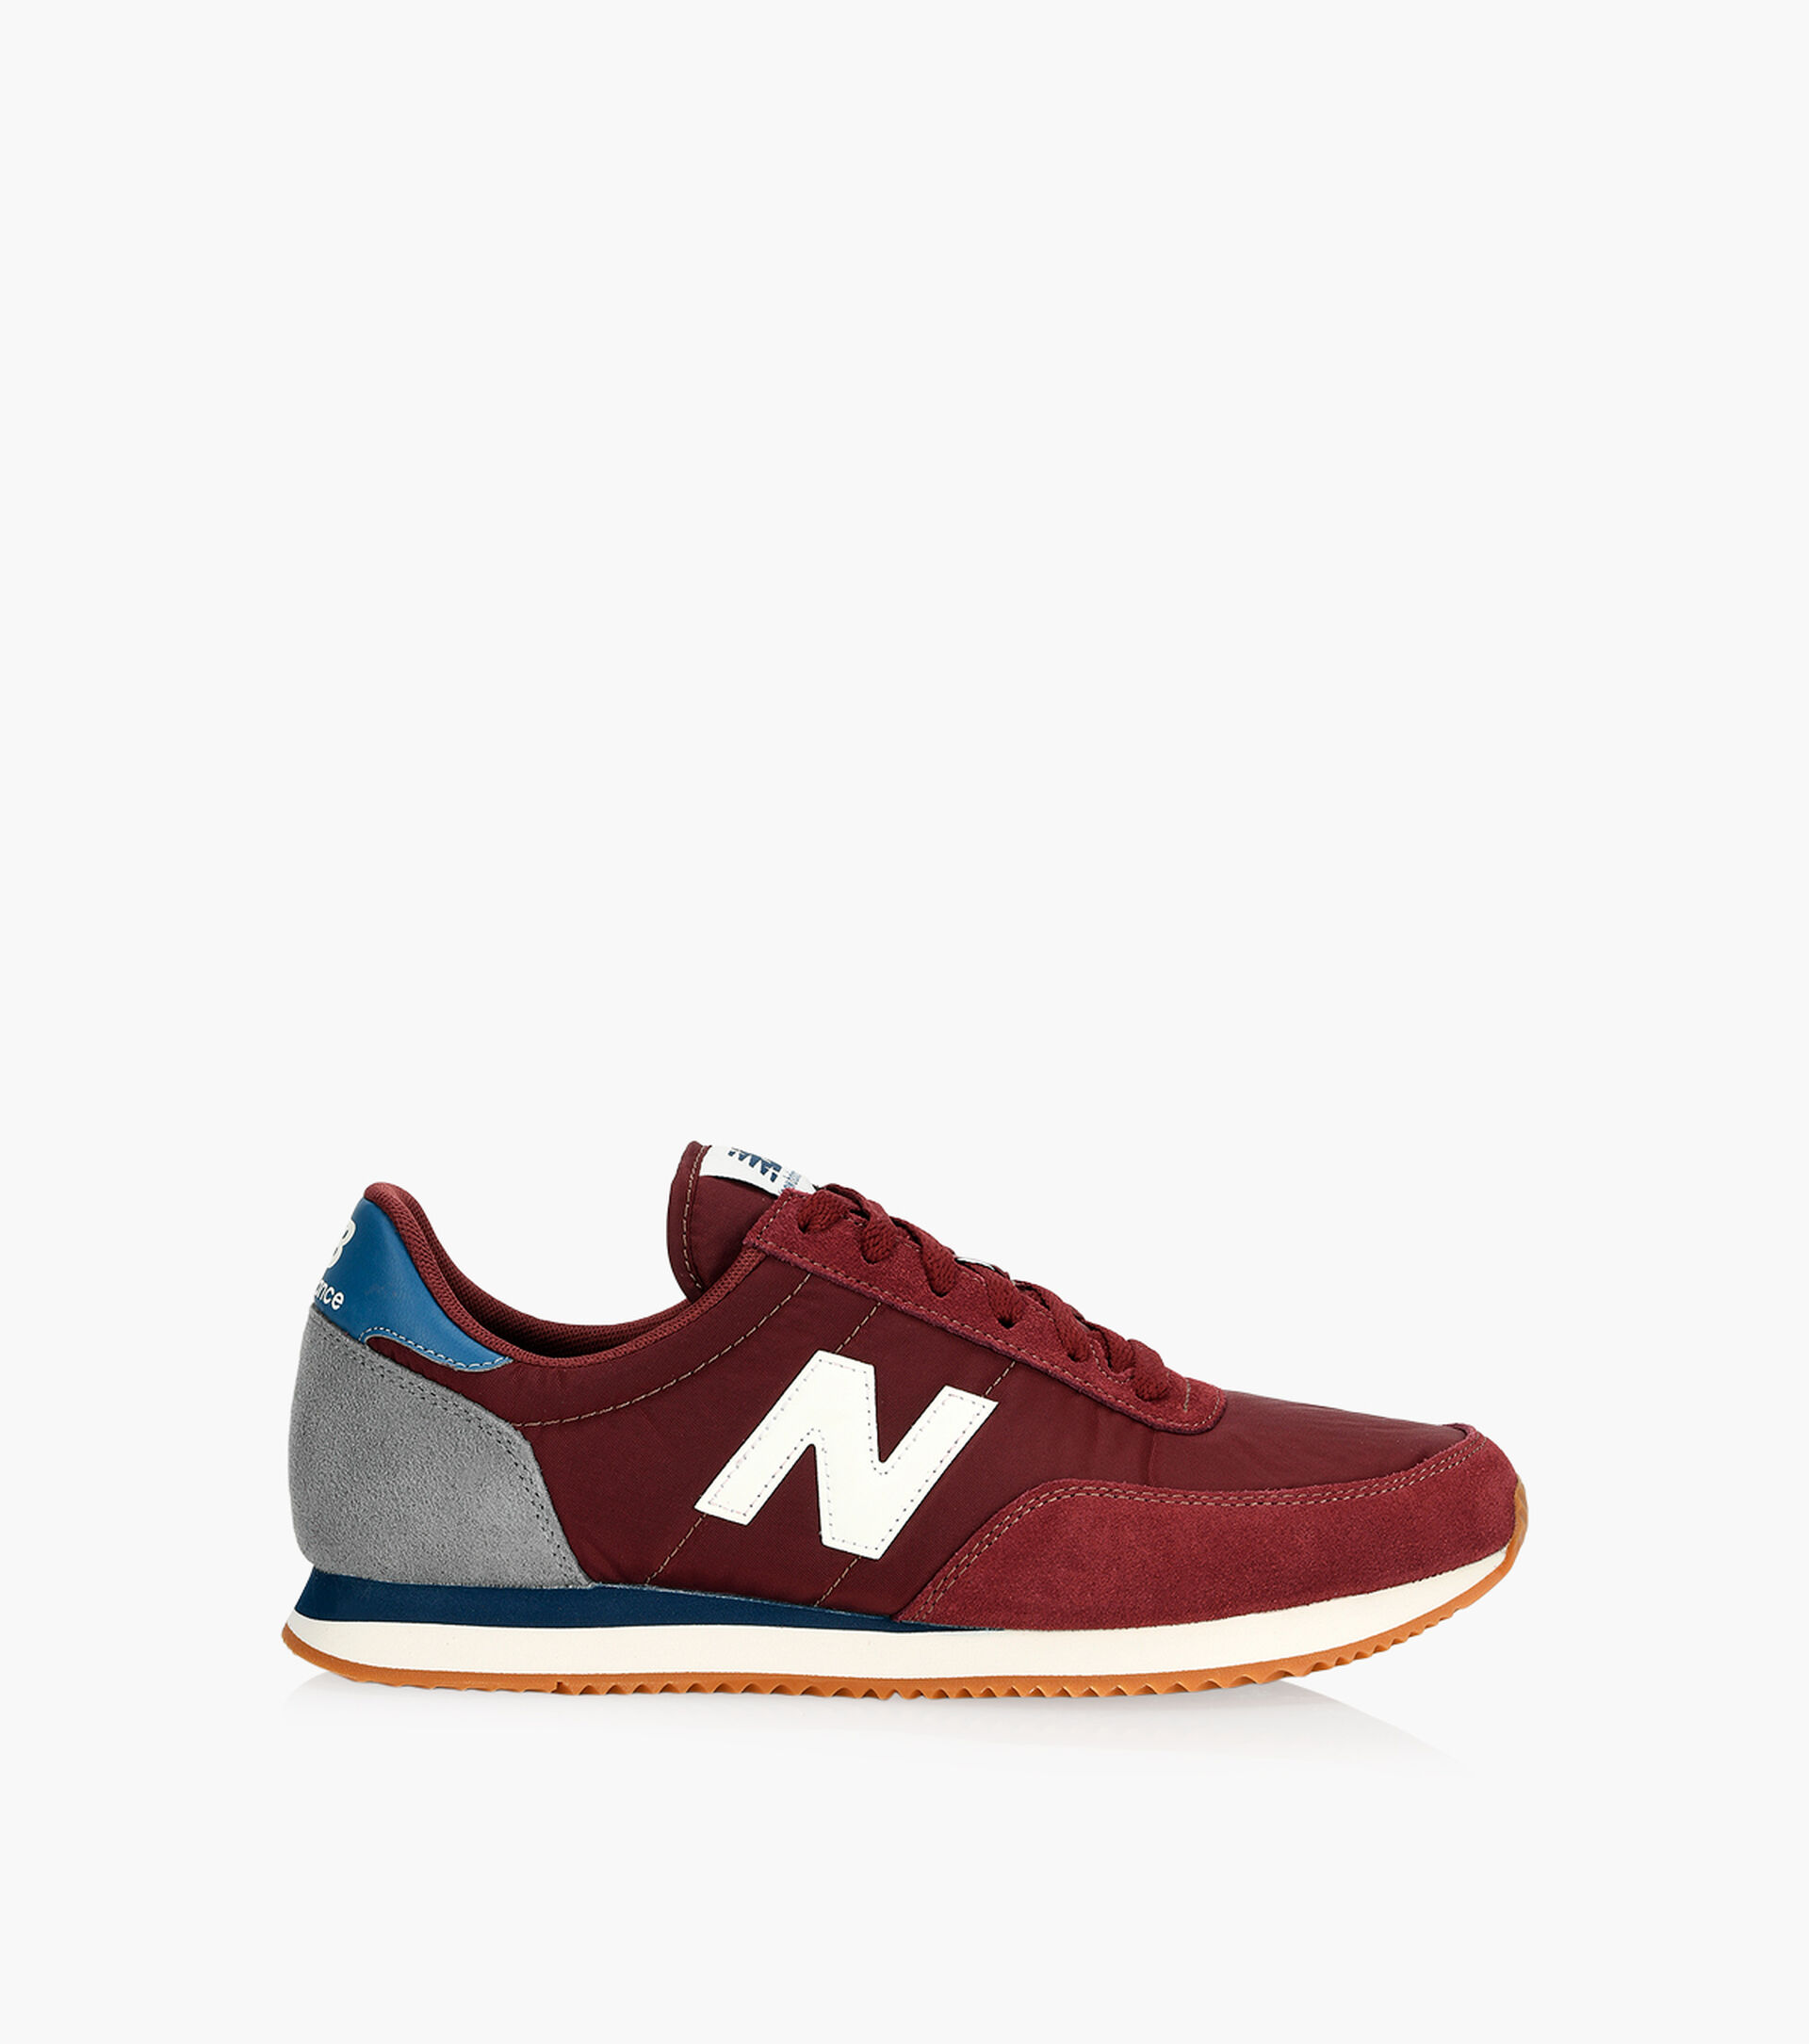 NEW BALANCE 720 - Fabric | Browns Shoes